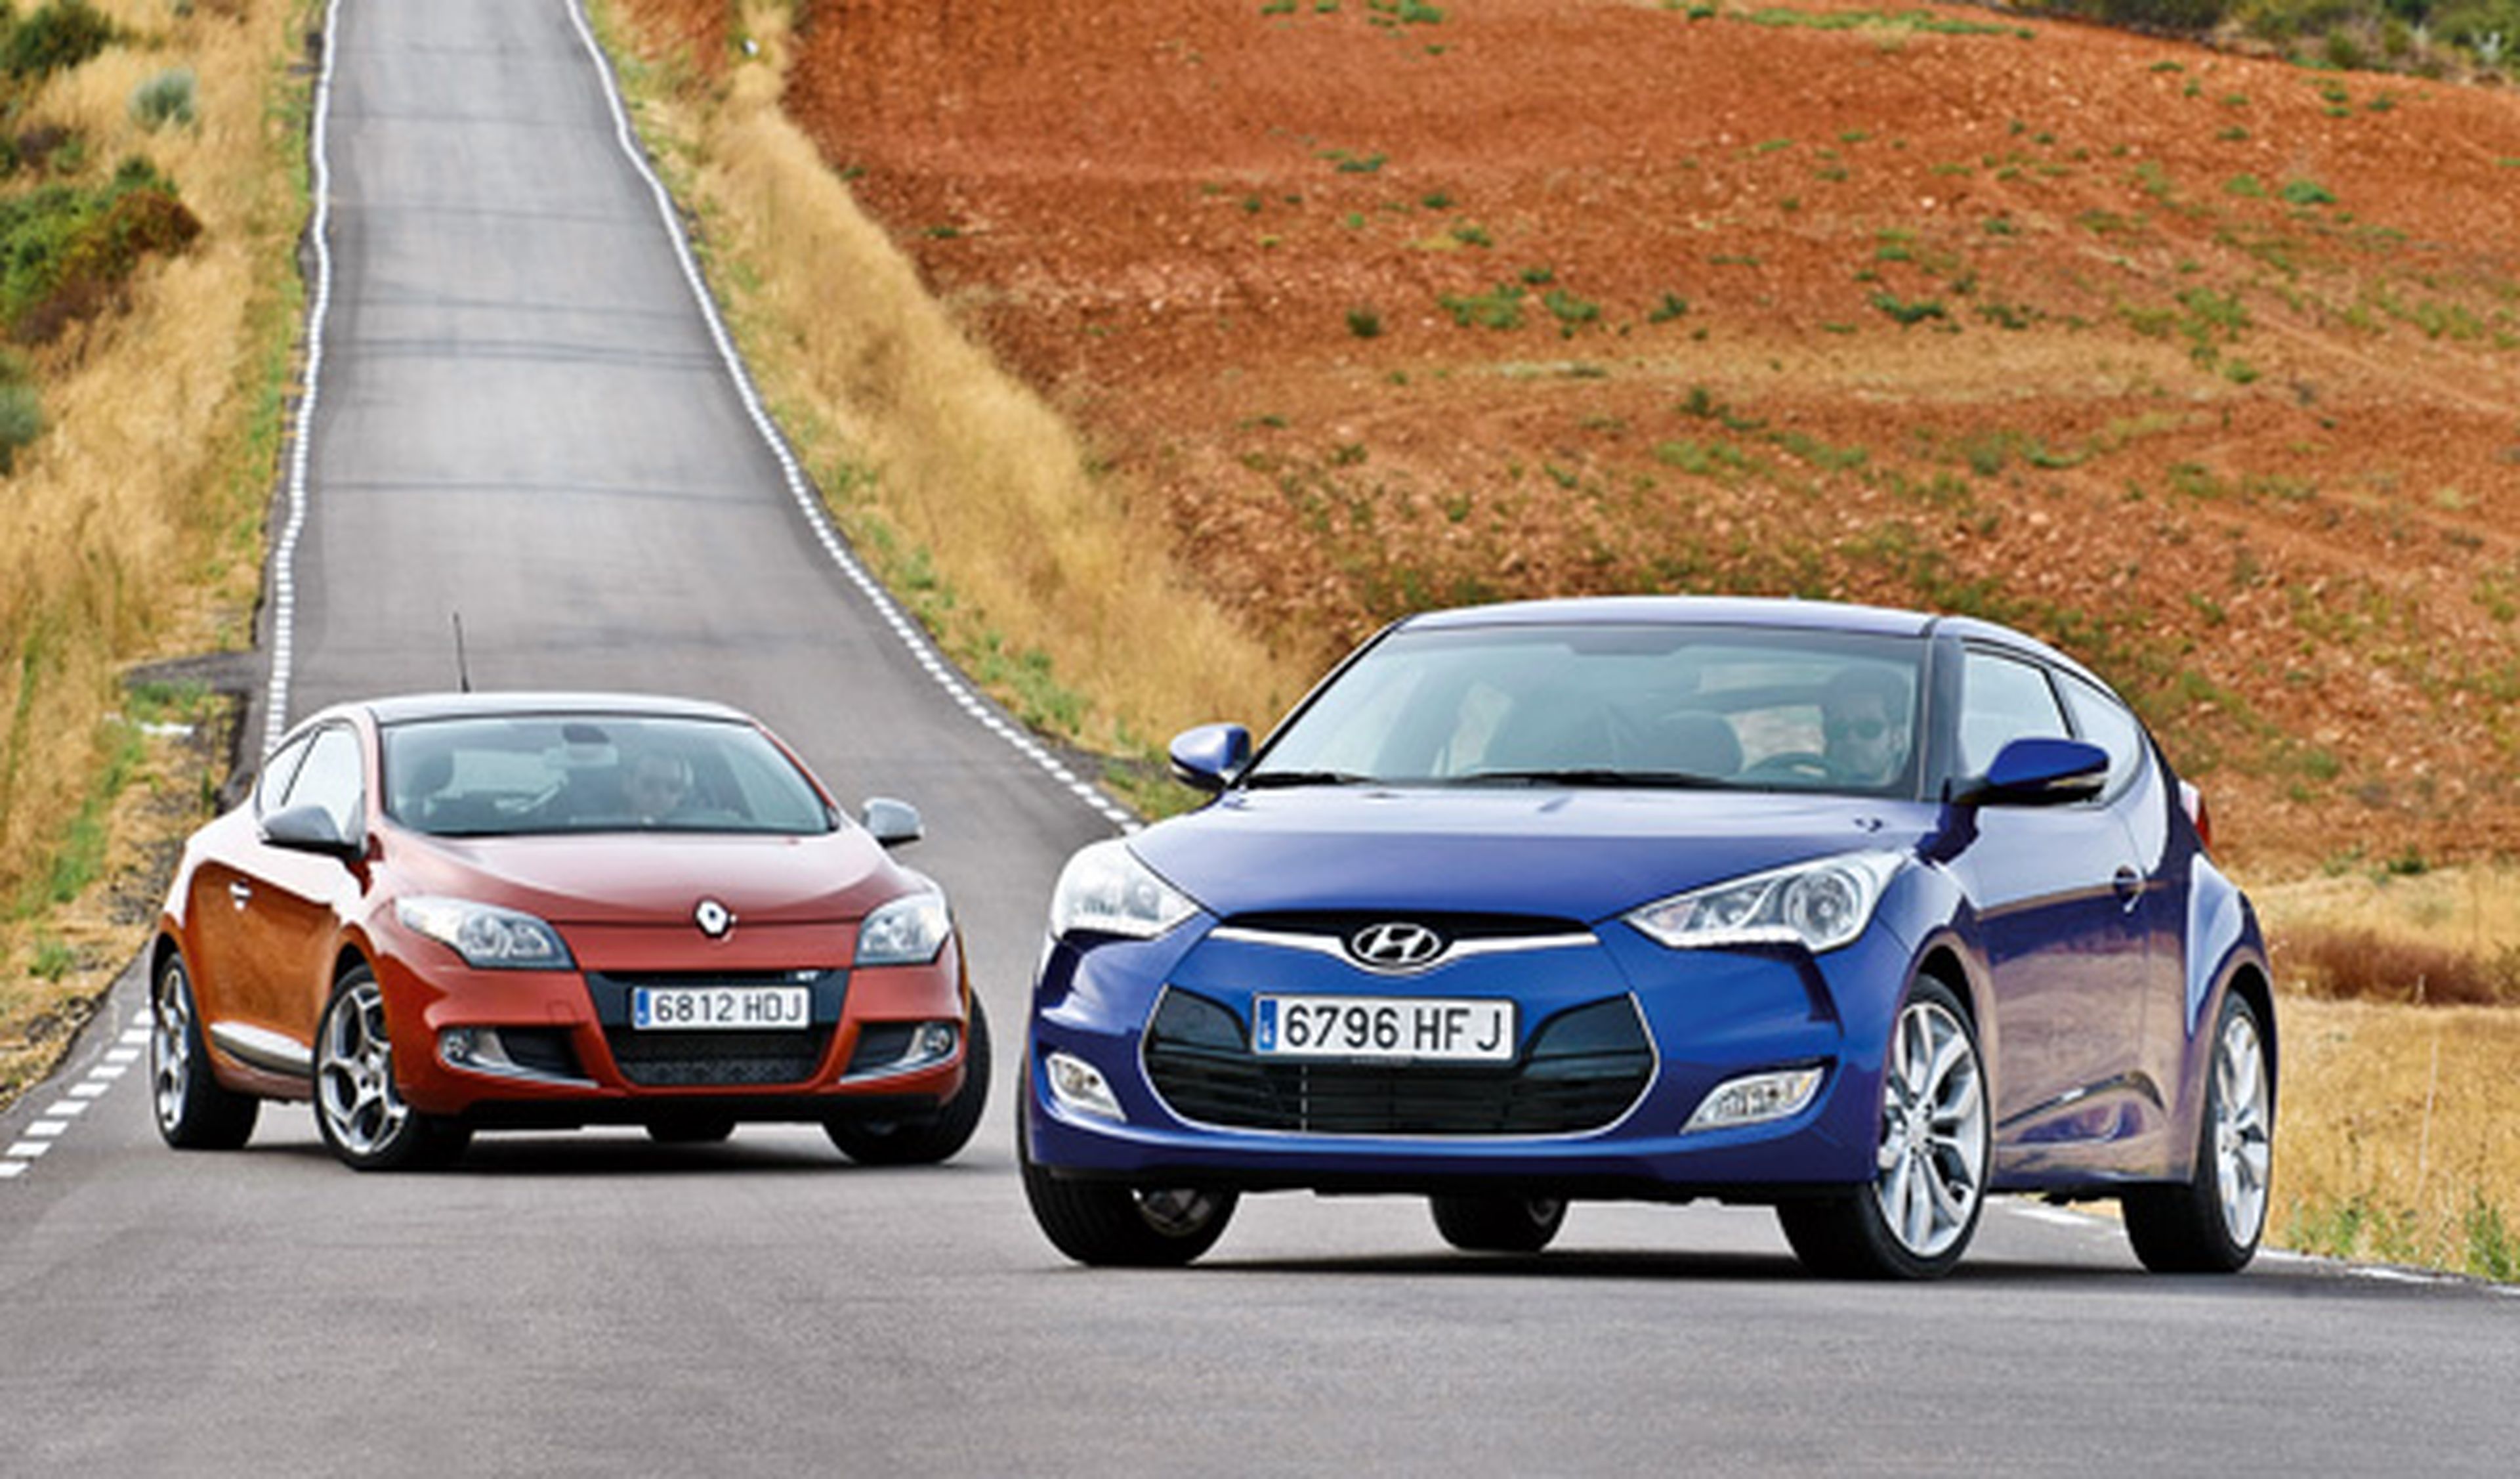 renault-megane-coupe-tce-hyundai-veloster-gdi-exterior-estática-frontal